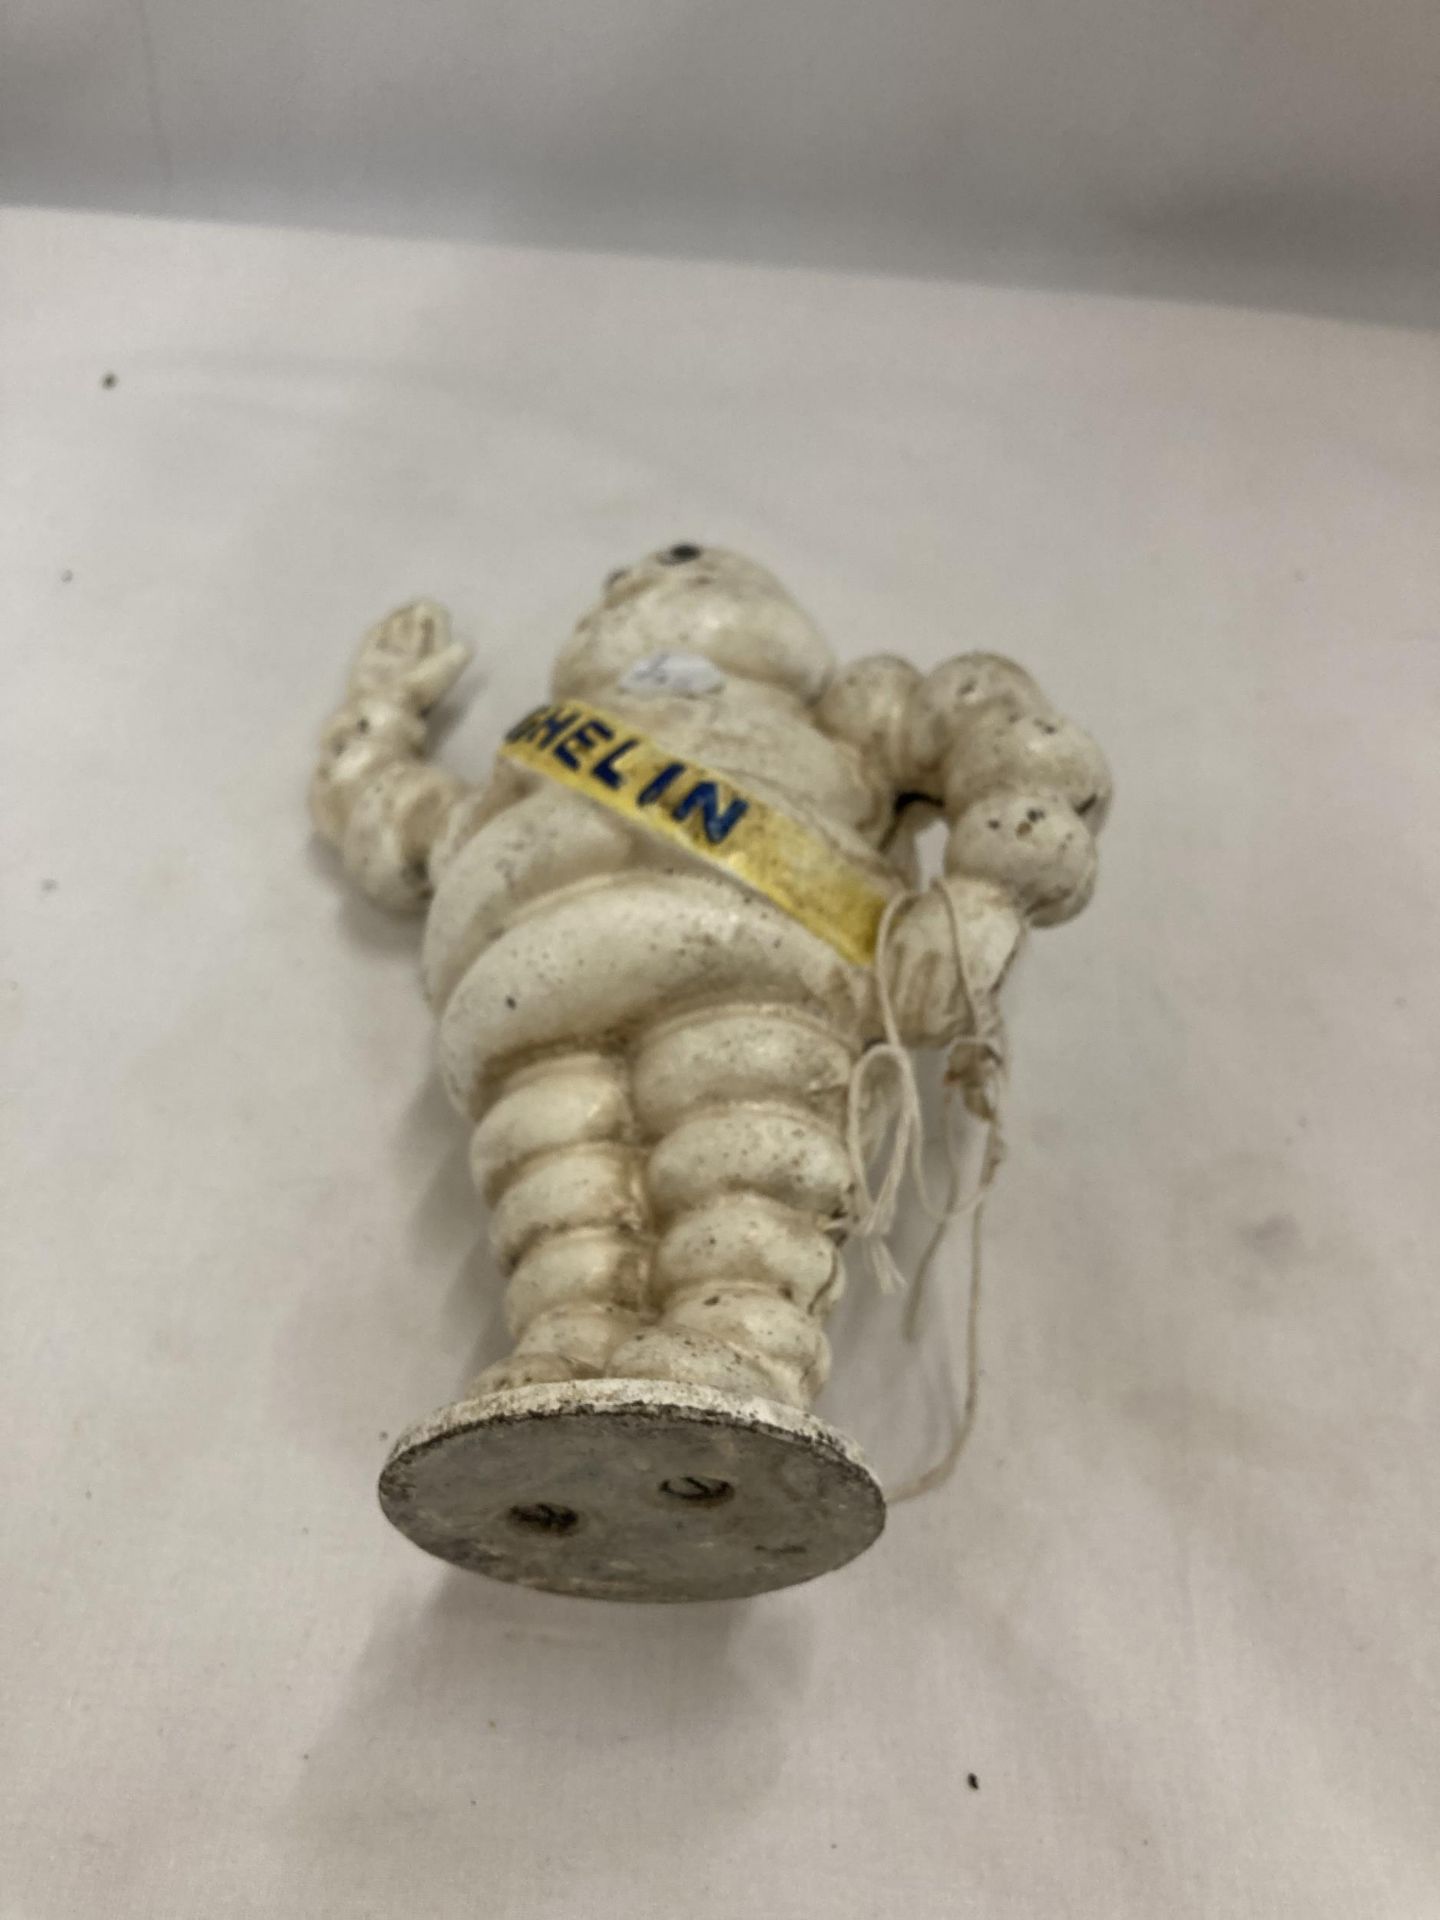 A CAST MICHELIN MAN FIGURE APPROX 21 CM TALL - Image 3 of 4